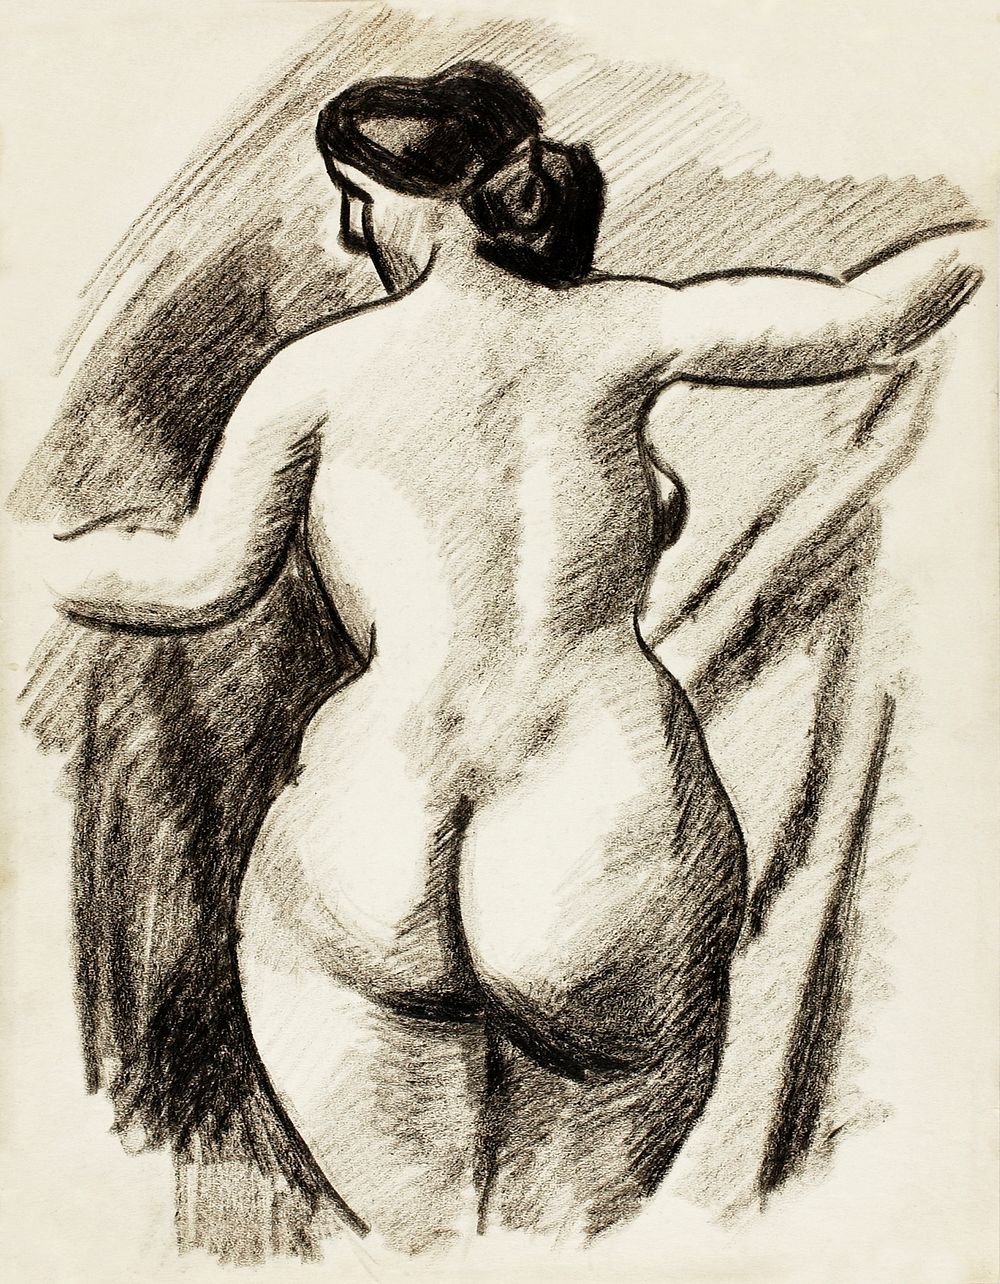 Woman showing off naked bum, vintage nude illustration.Female Nude by Carl Newman. Original from The Smithsonian. Digitally…